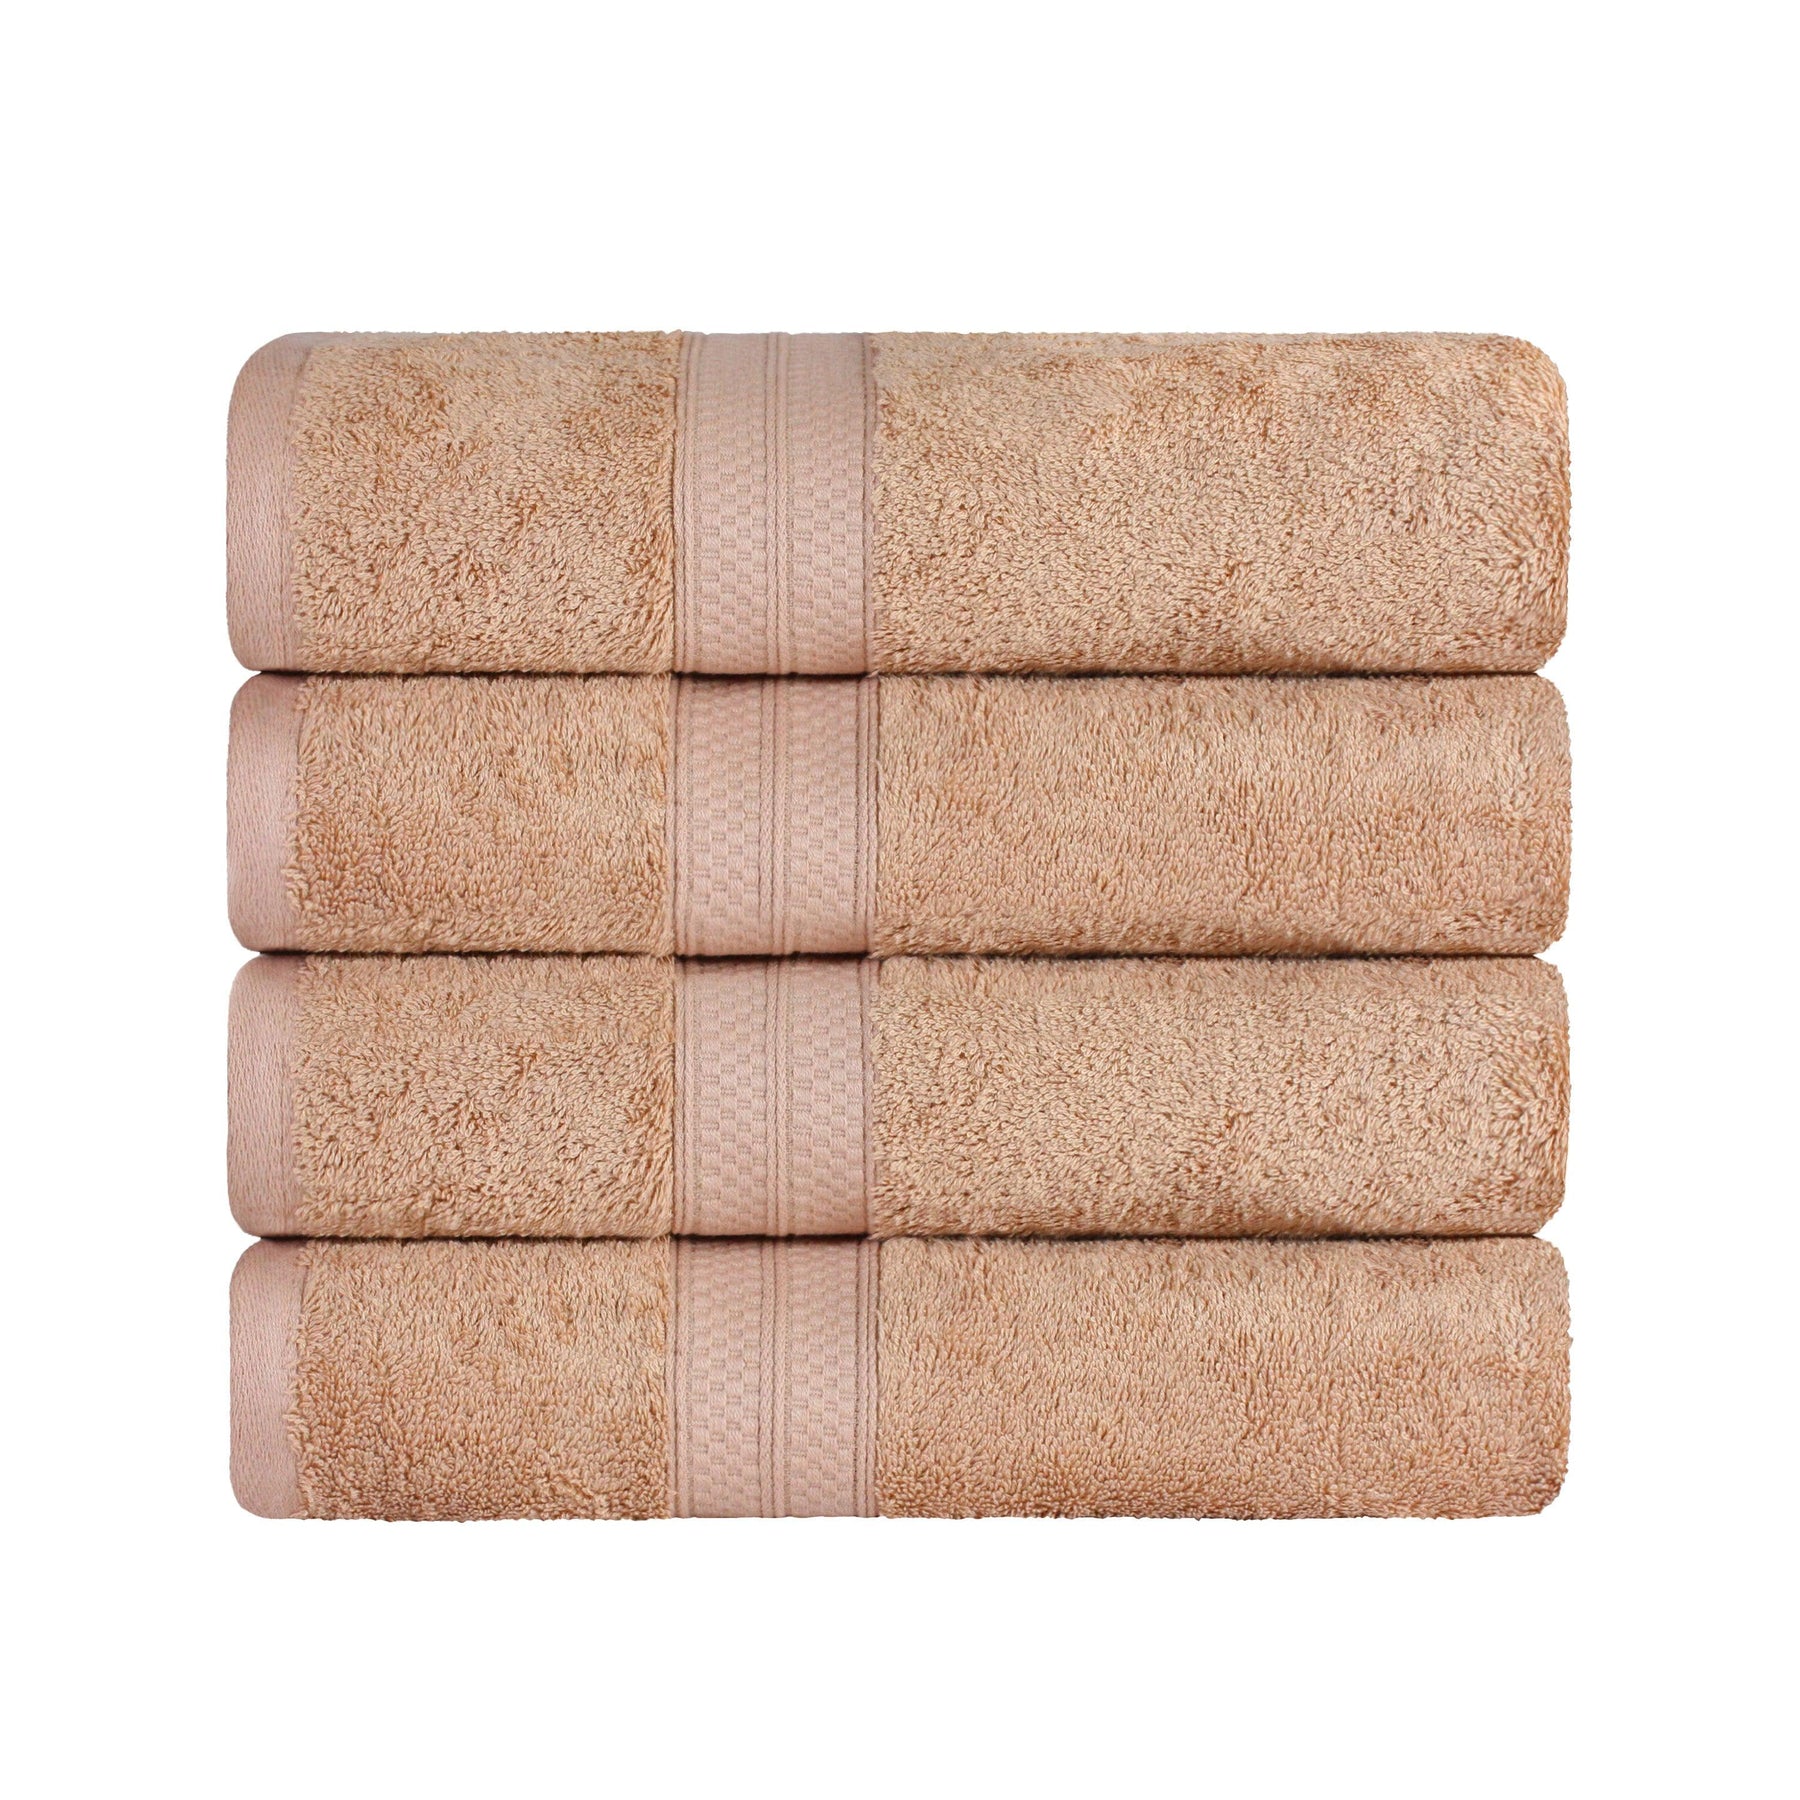  Ultra-Soft Hypoallergenic Rayon from Bamboo Cotton Blend Assorted Bath Towel Set -  SAnd